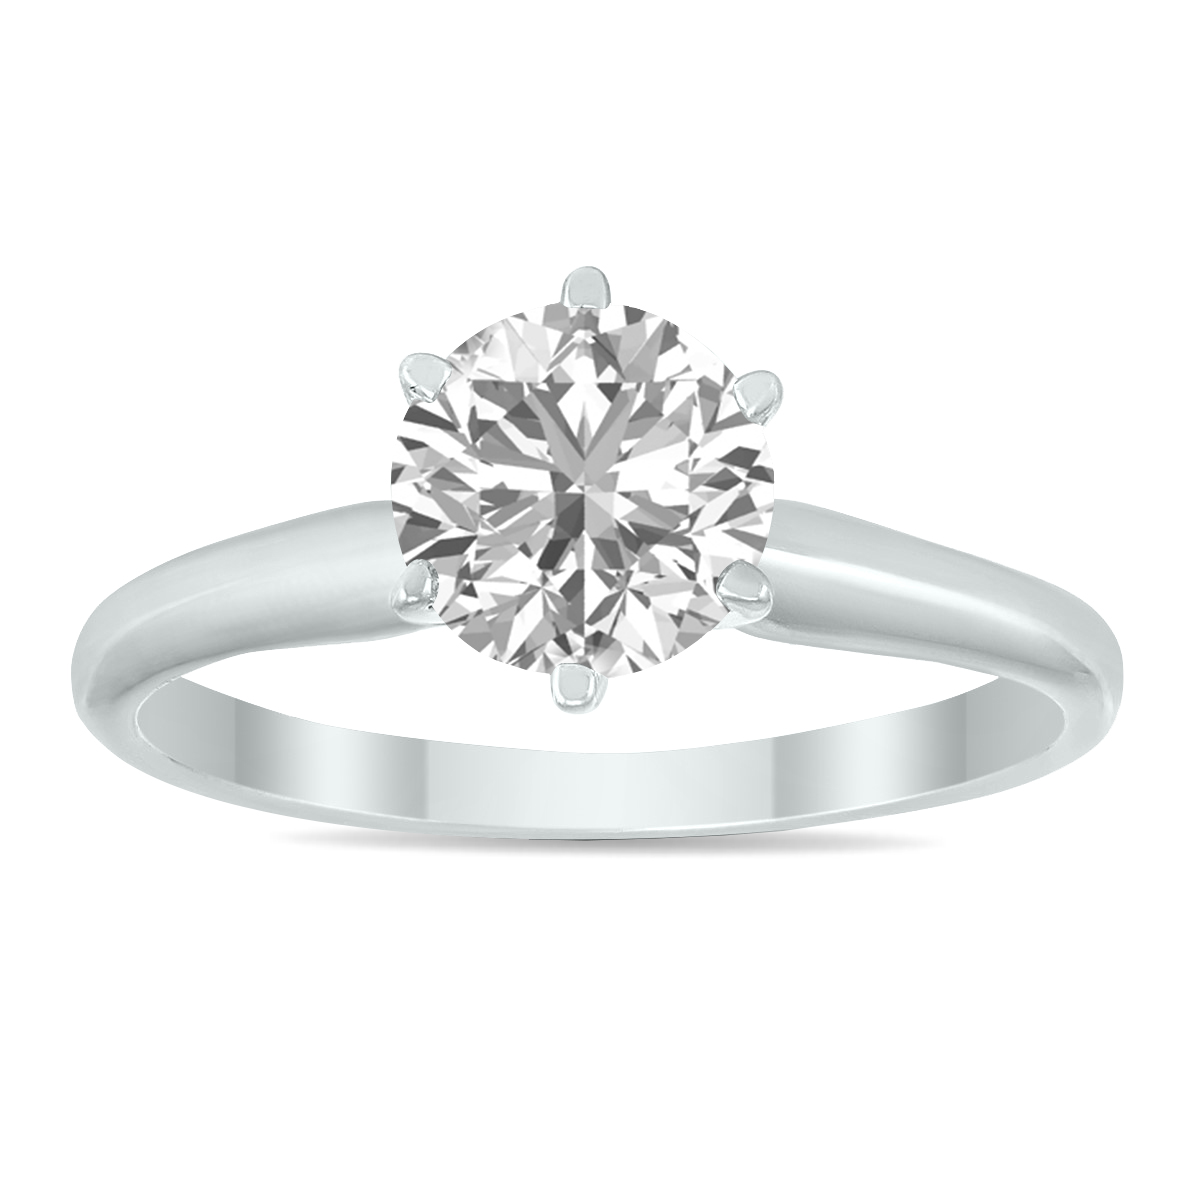 Image of IGI Certified Lab Grown 1 Carat Diamond Solitaire Ring in 14K White Gold (I Color SI1 Clarity)